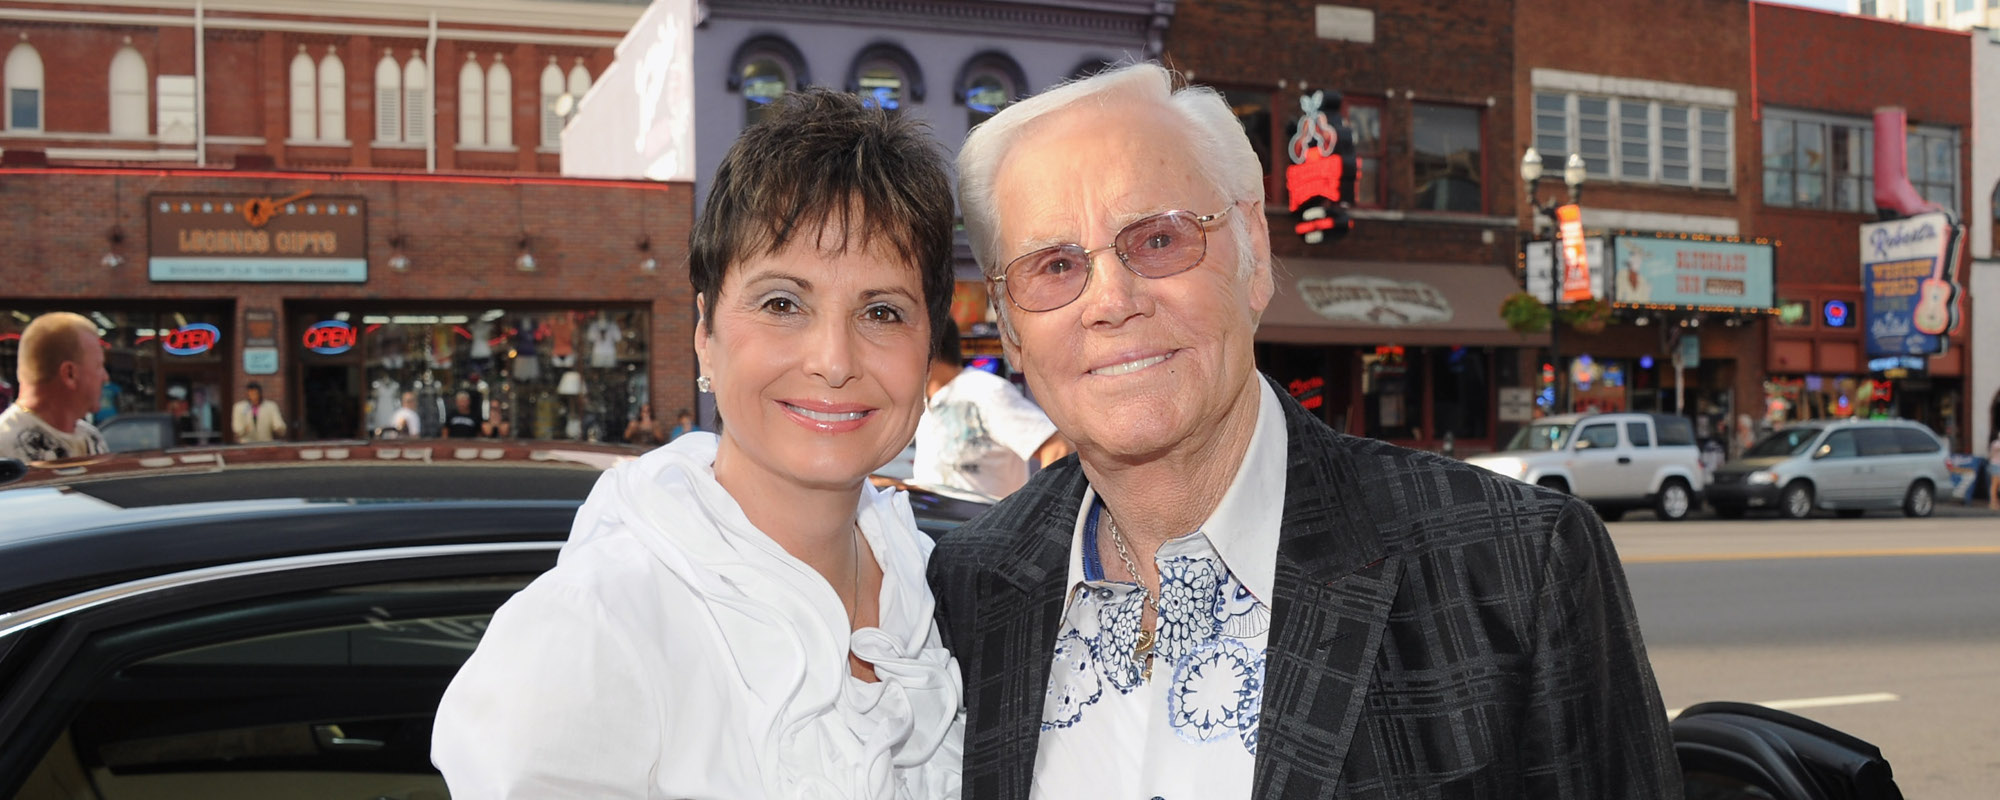 Nancy Jones Wants Fans to Know The Real George Jones in New Book ‘Playin’ Possum’